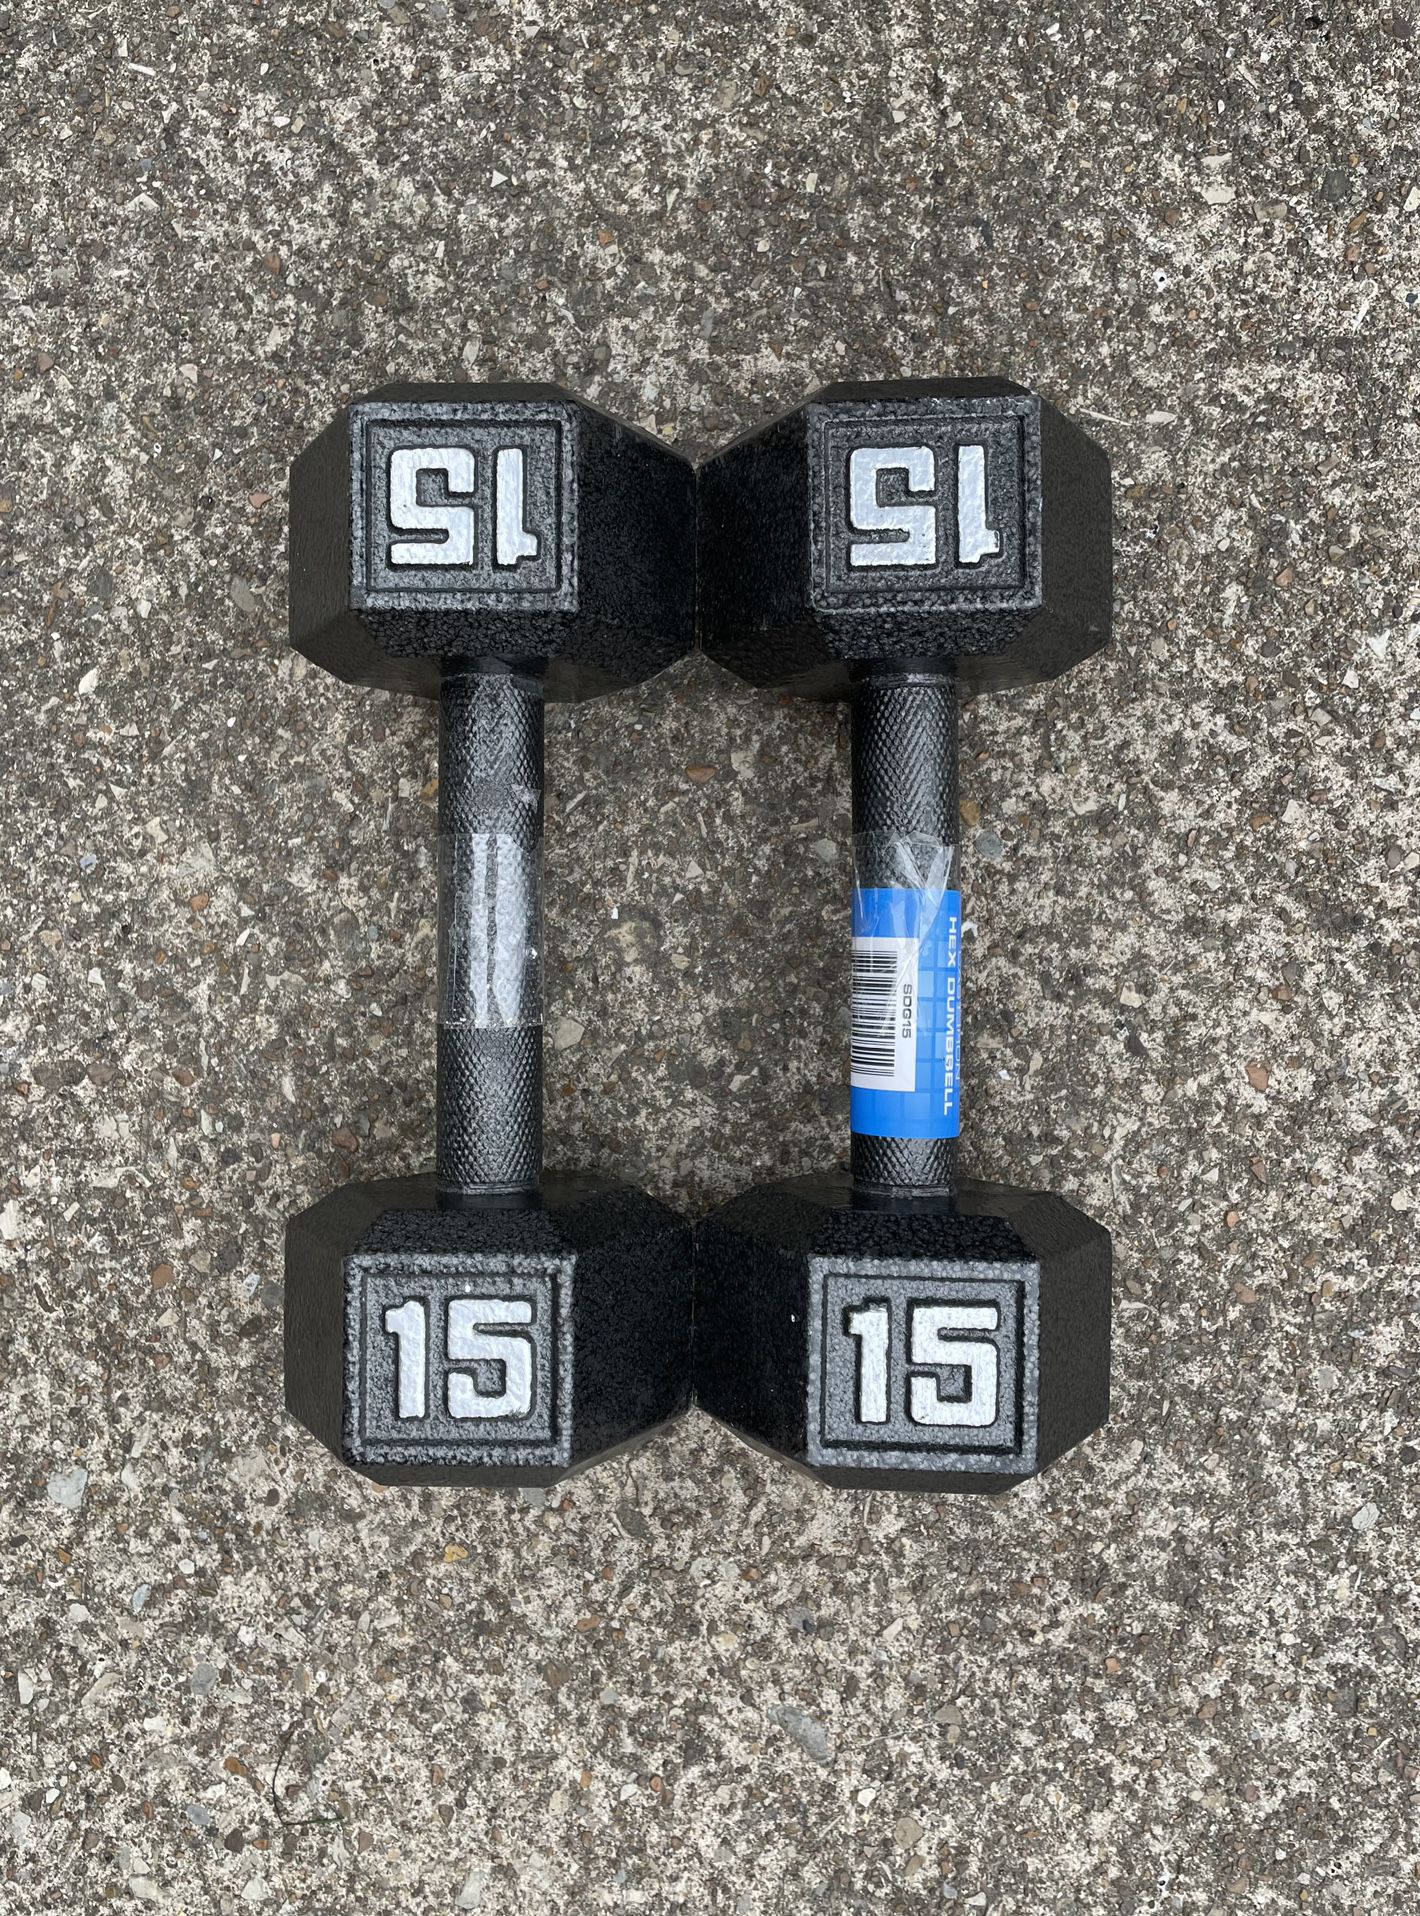 15 lb dumbbells dumbbell set 30 lbs total Cast Iron hex weights weight pair pounds pound  15lb 15lbs 30lbs